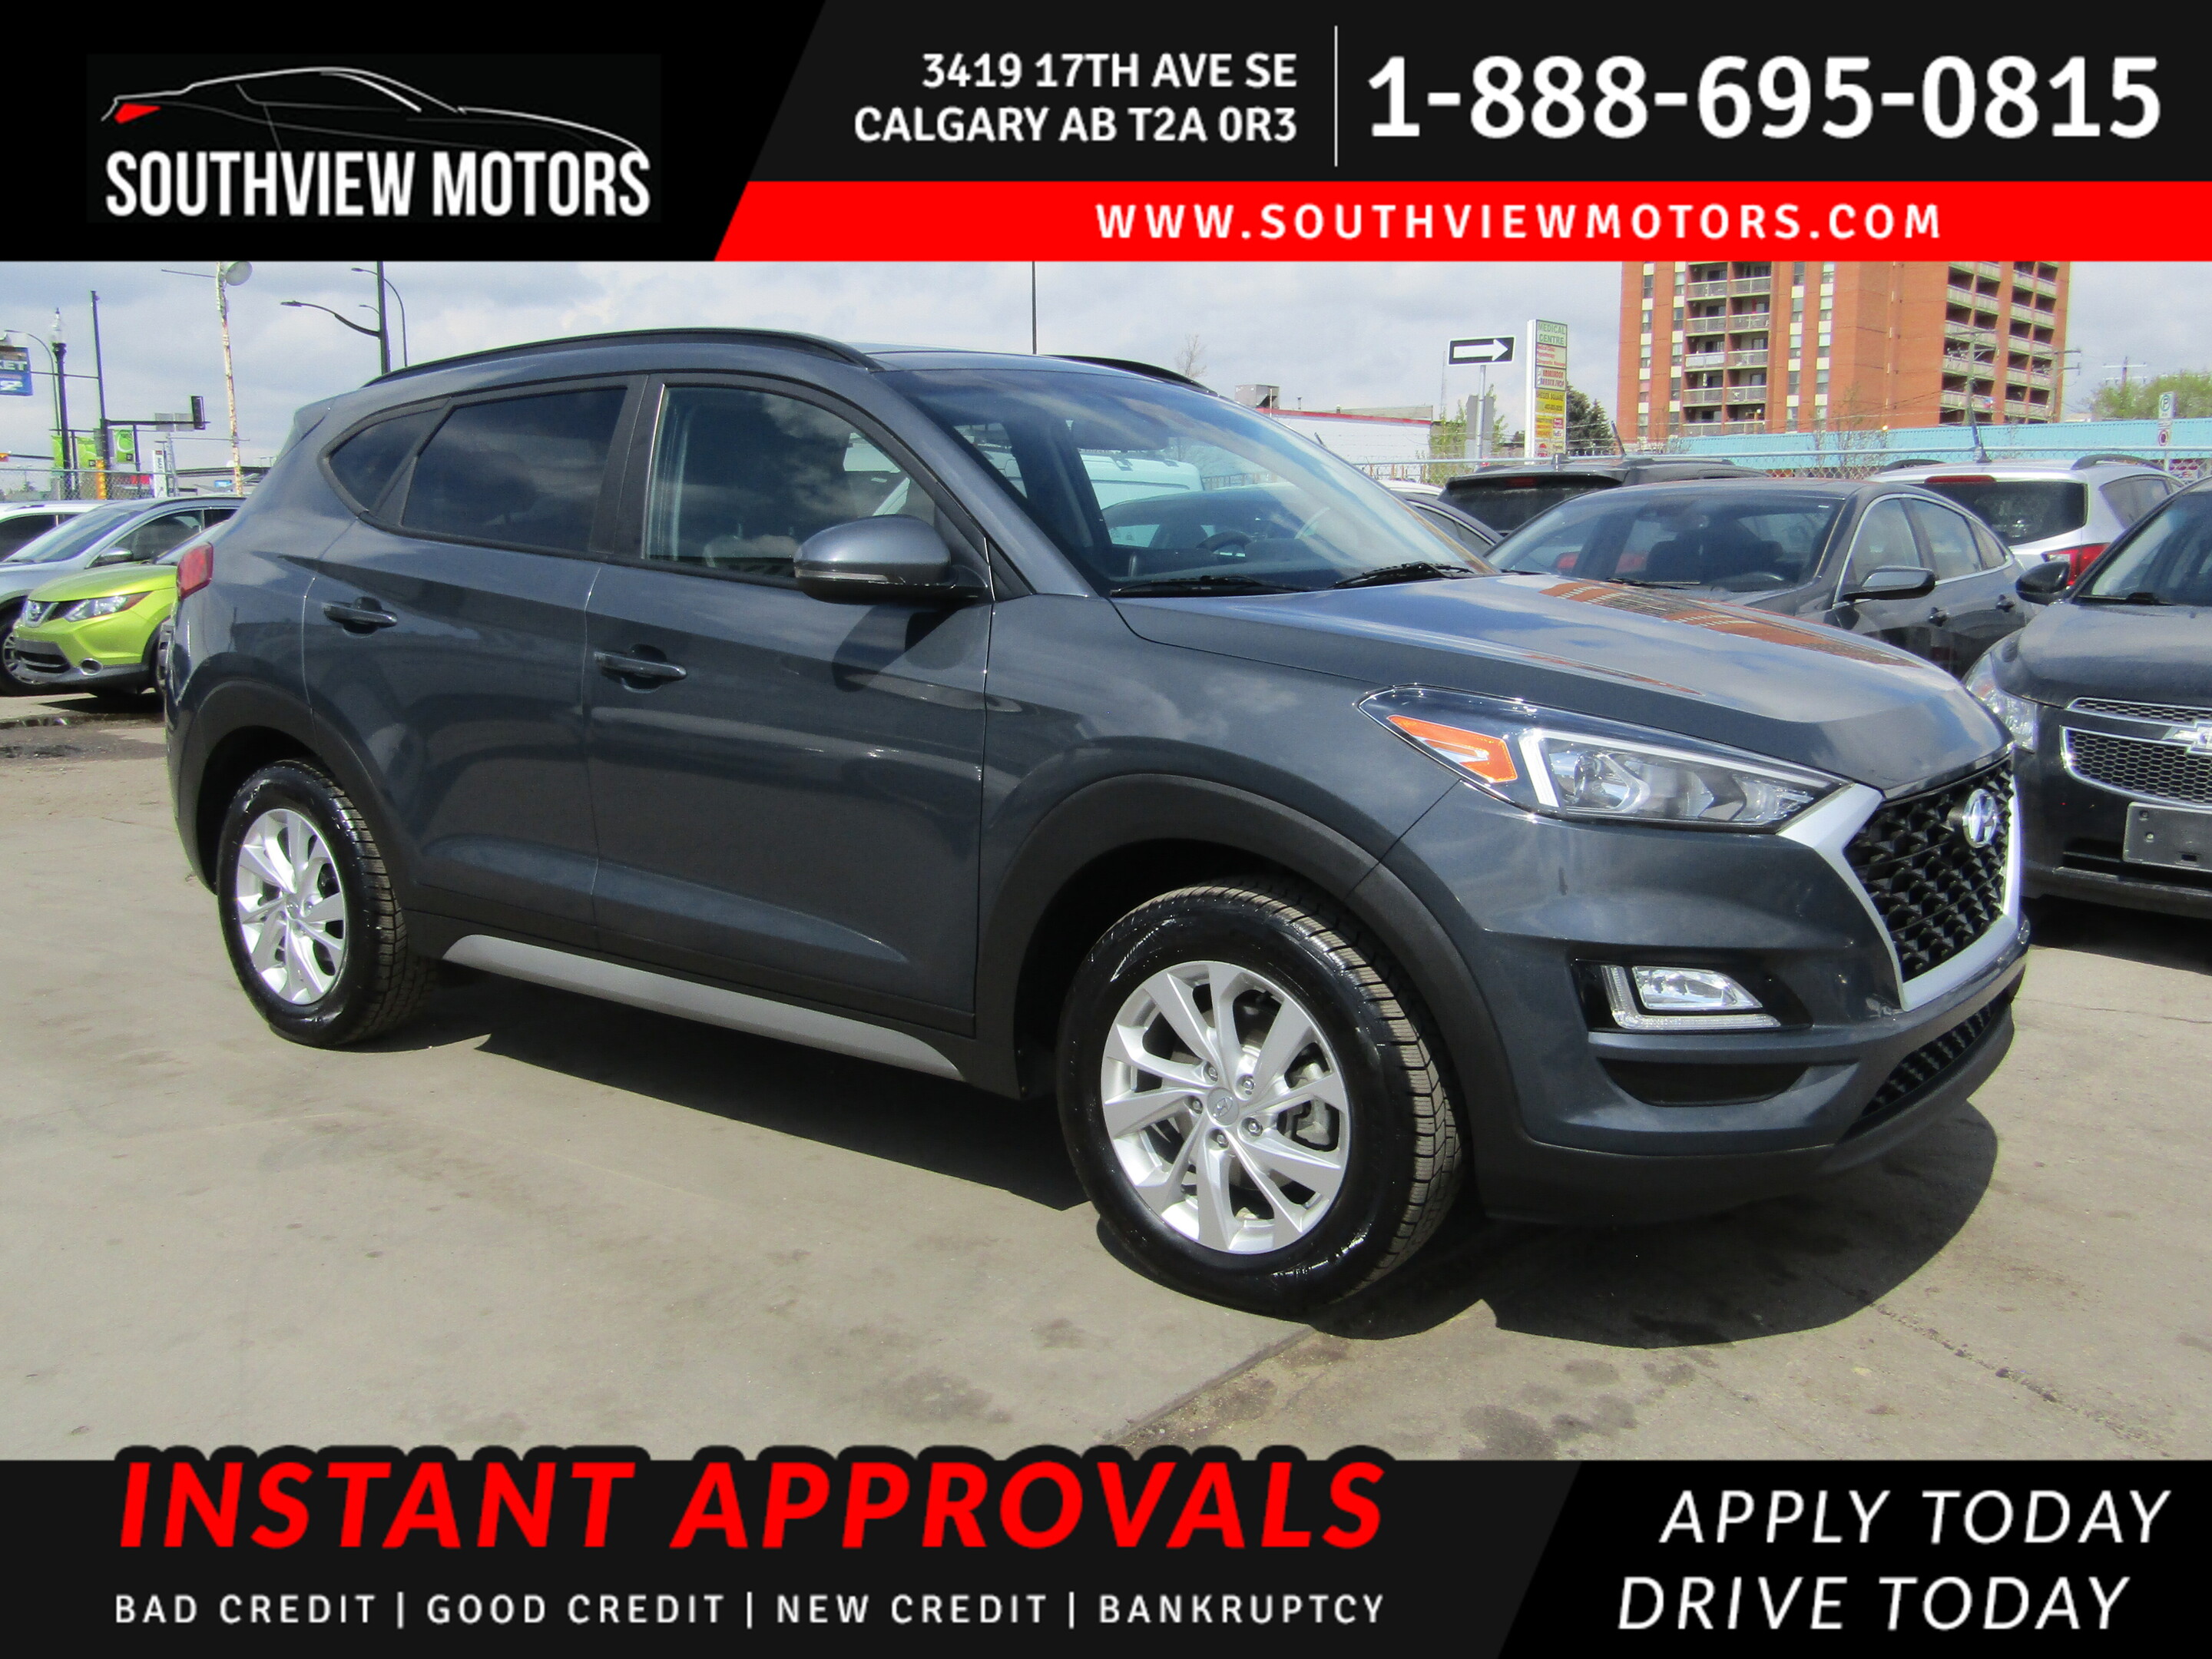 2020 Hyundai Tucson LIMITED AWD B.S.A/CAM/PANO ROOF/LEATHER/LOADED!